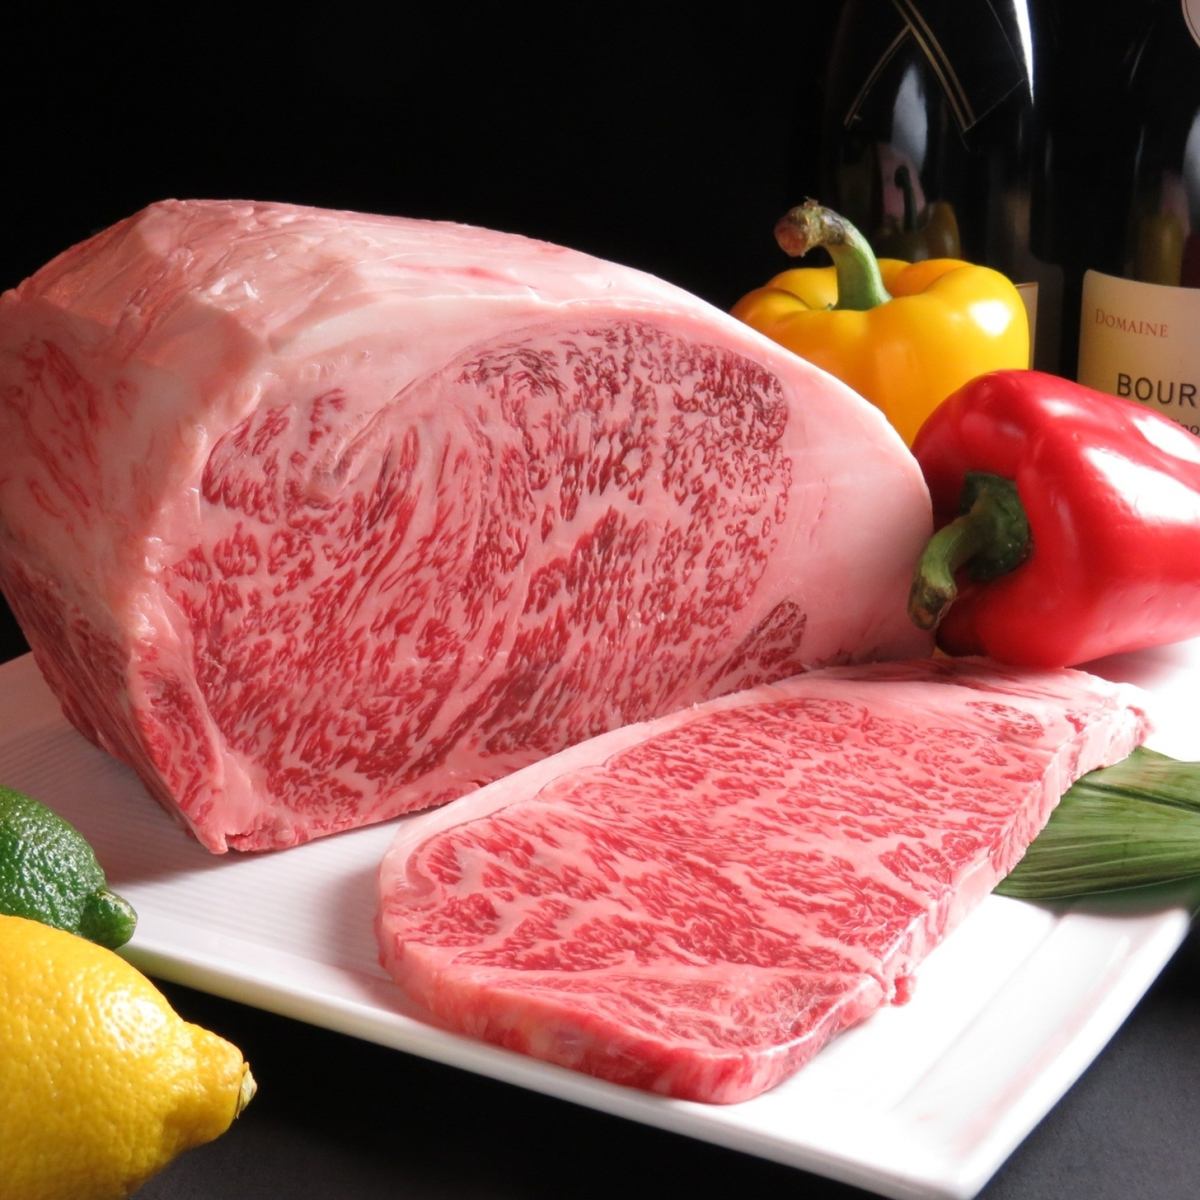 You can get A5 rank Matsusaka beef at a reasonable price because we are a directly managed meat wholesaler.